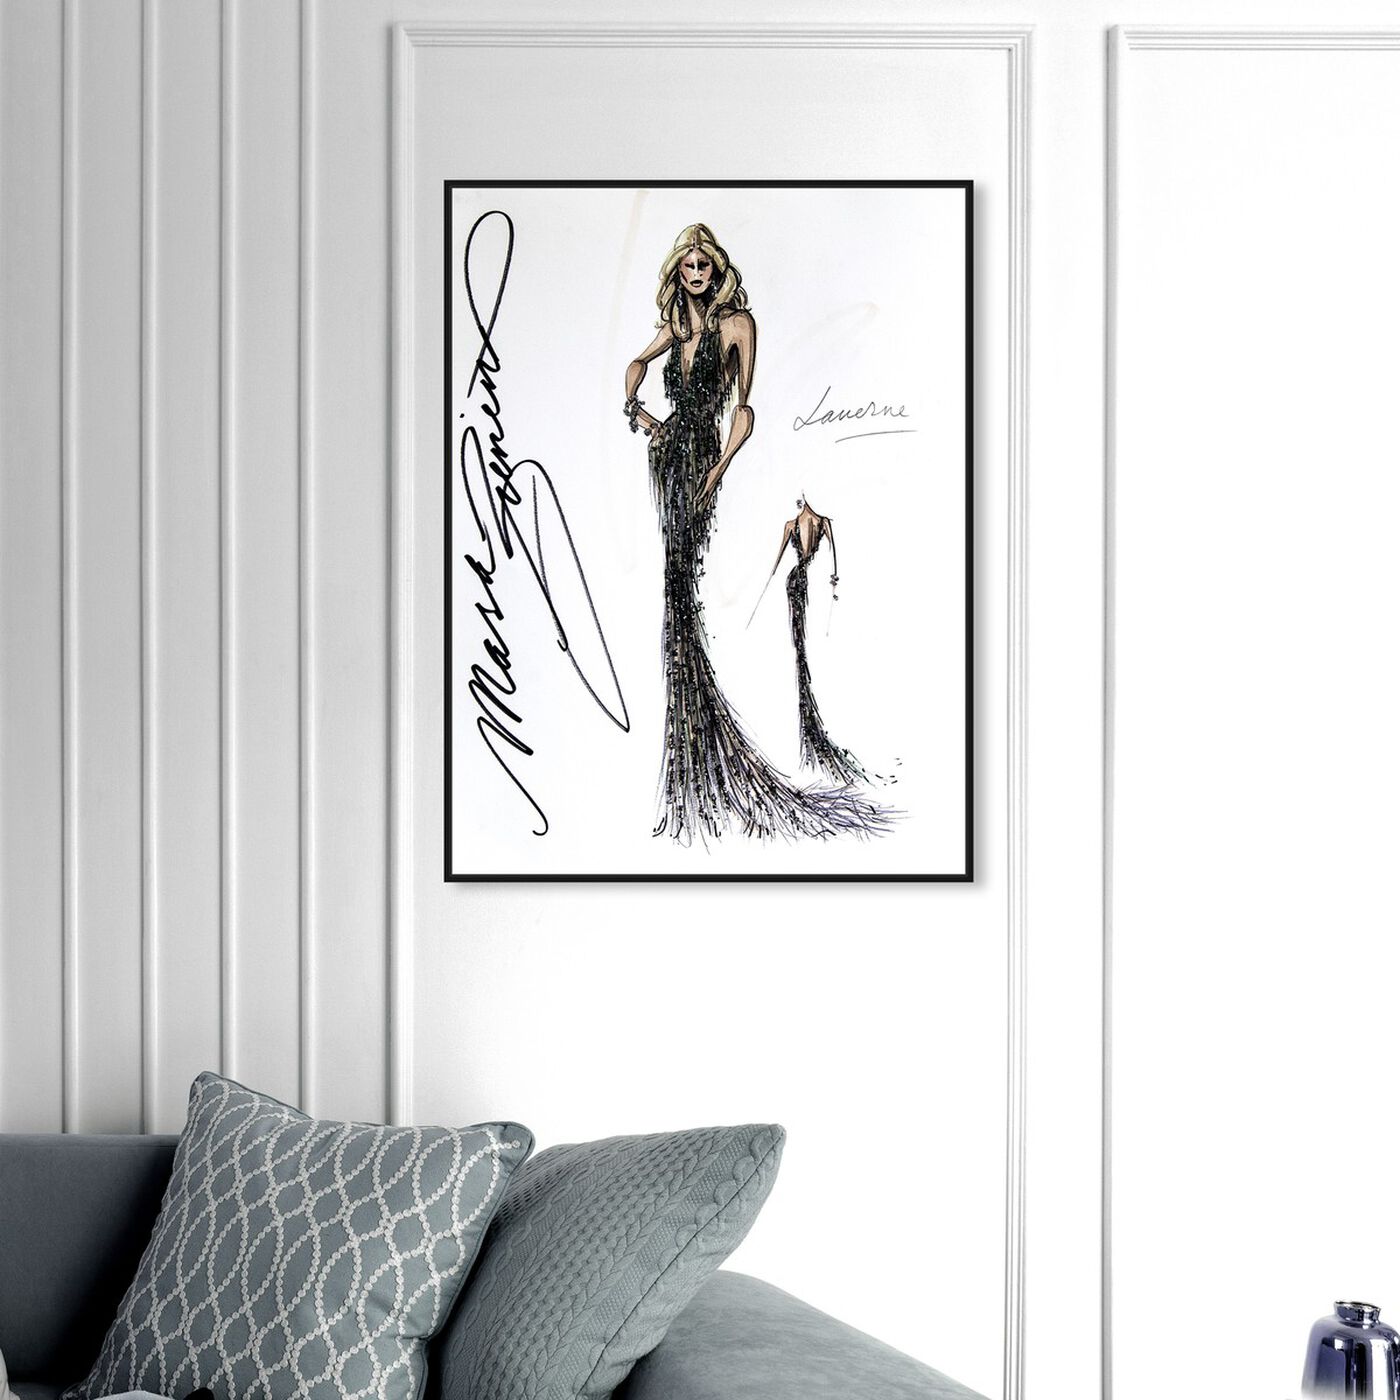 Hanging view of Mark Zunino - Laverne featuring fashion and glam and dress art.